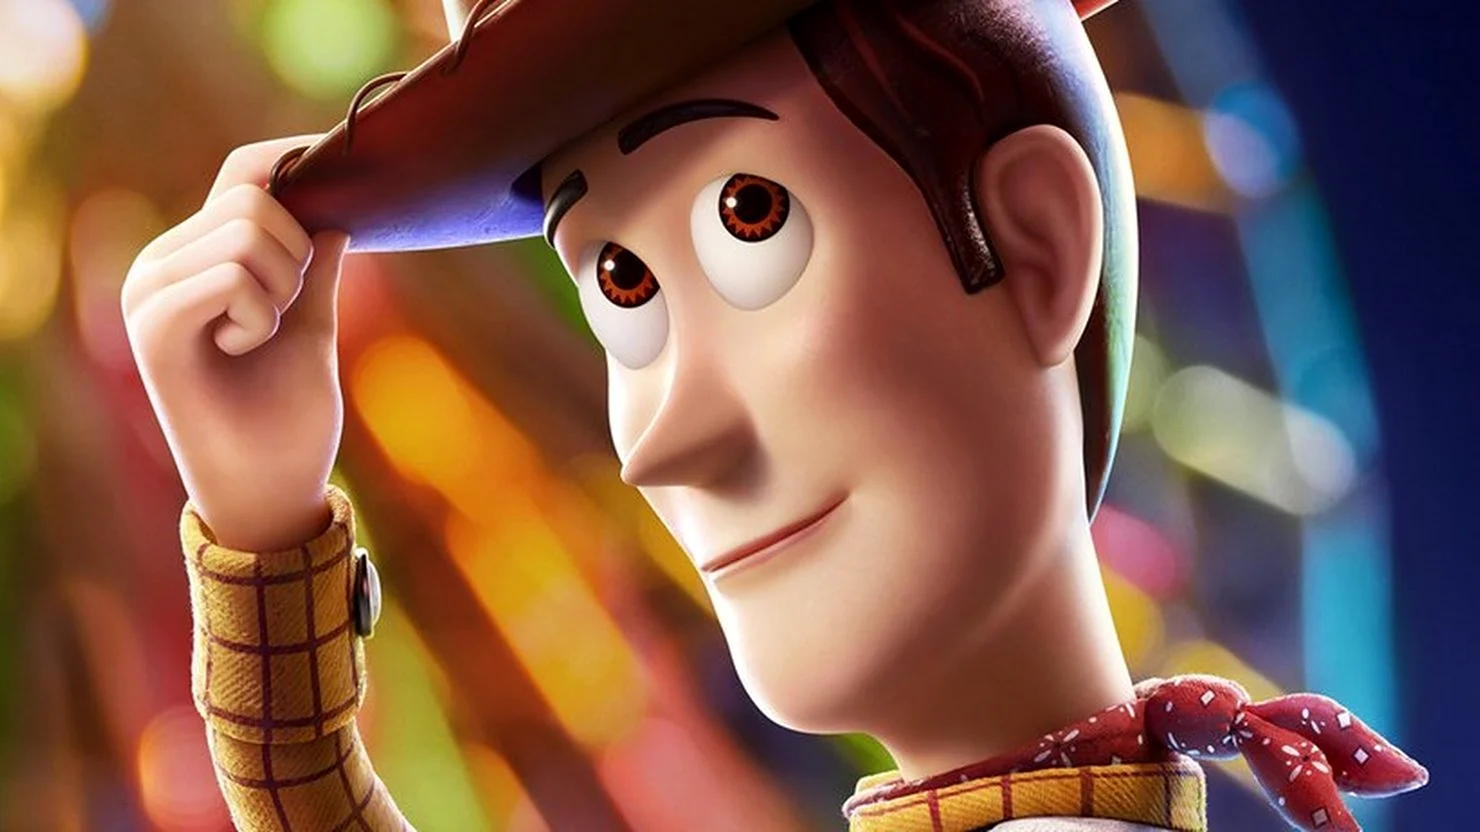 Toy story 4 Woody